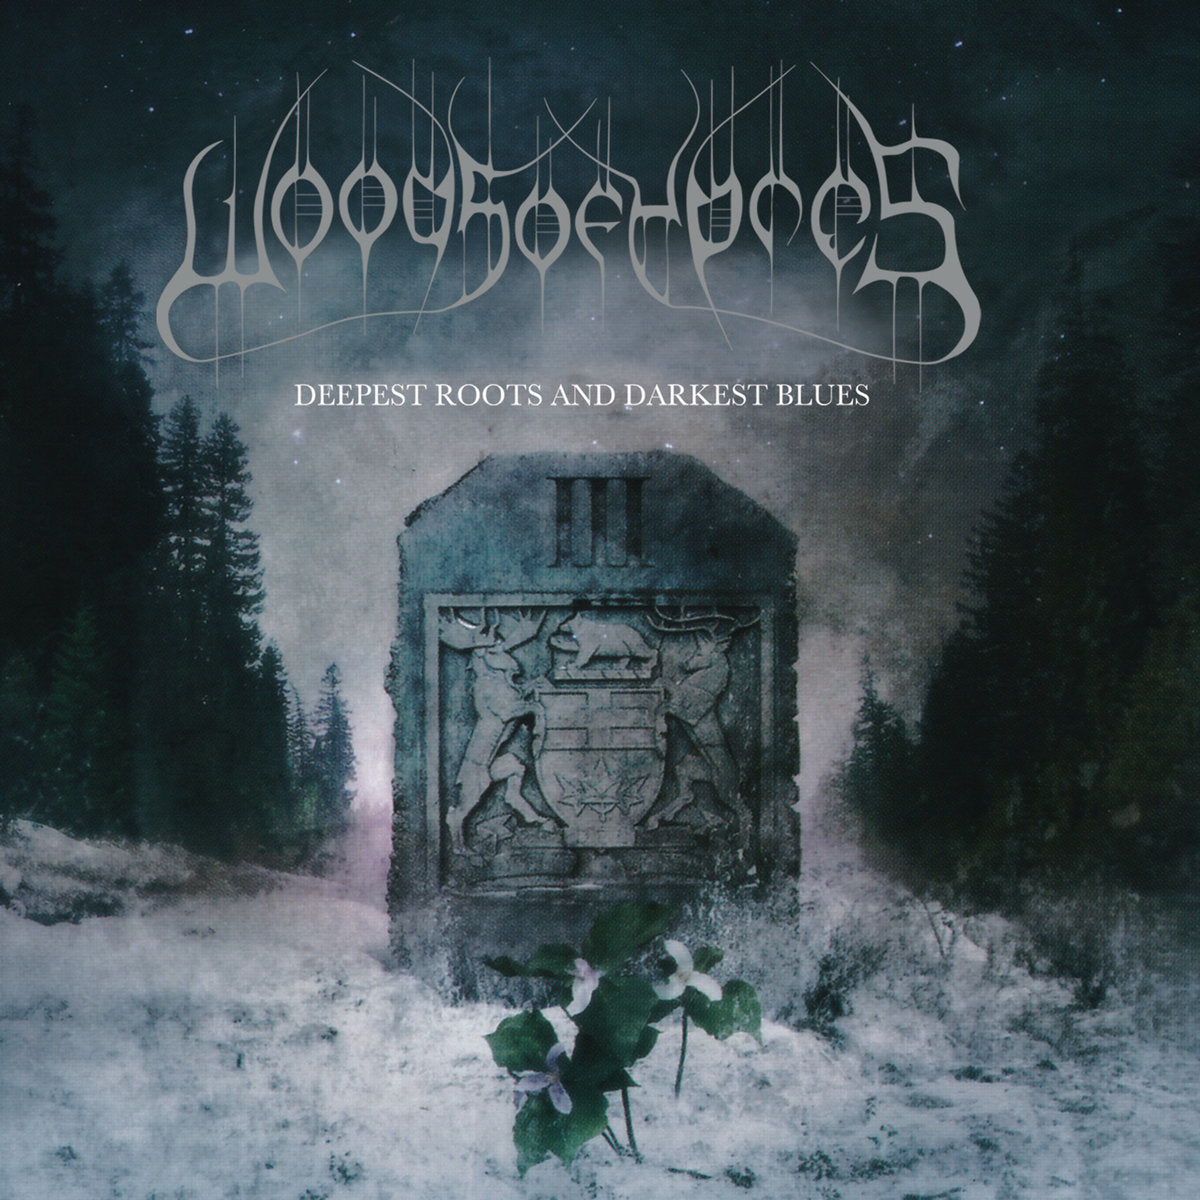 Woods Of Ypres "Woods III: The Deepest Roots and Darkest Blues" CD